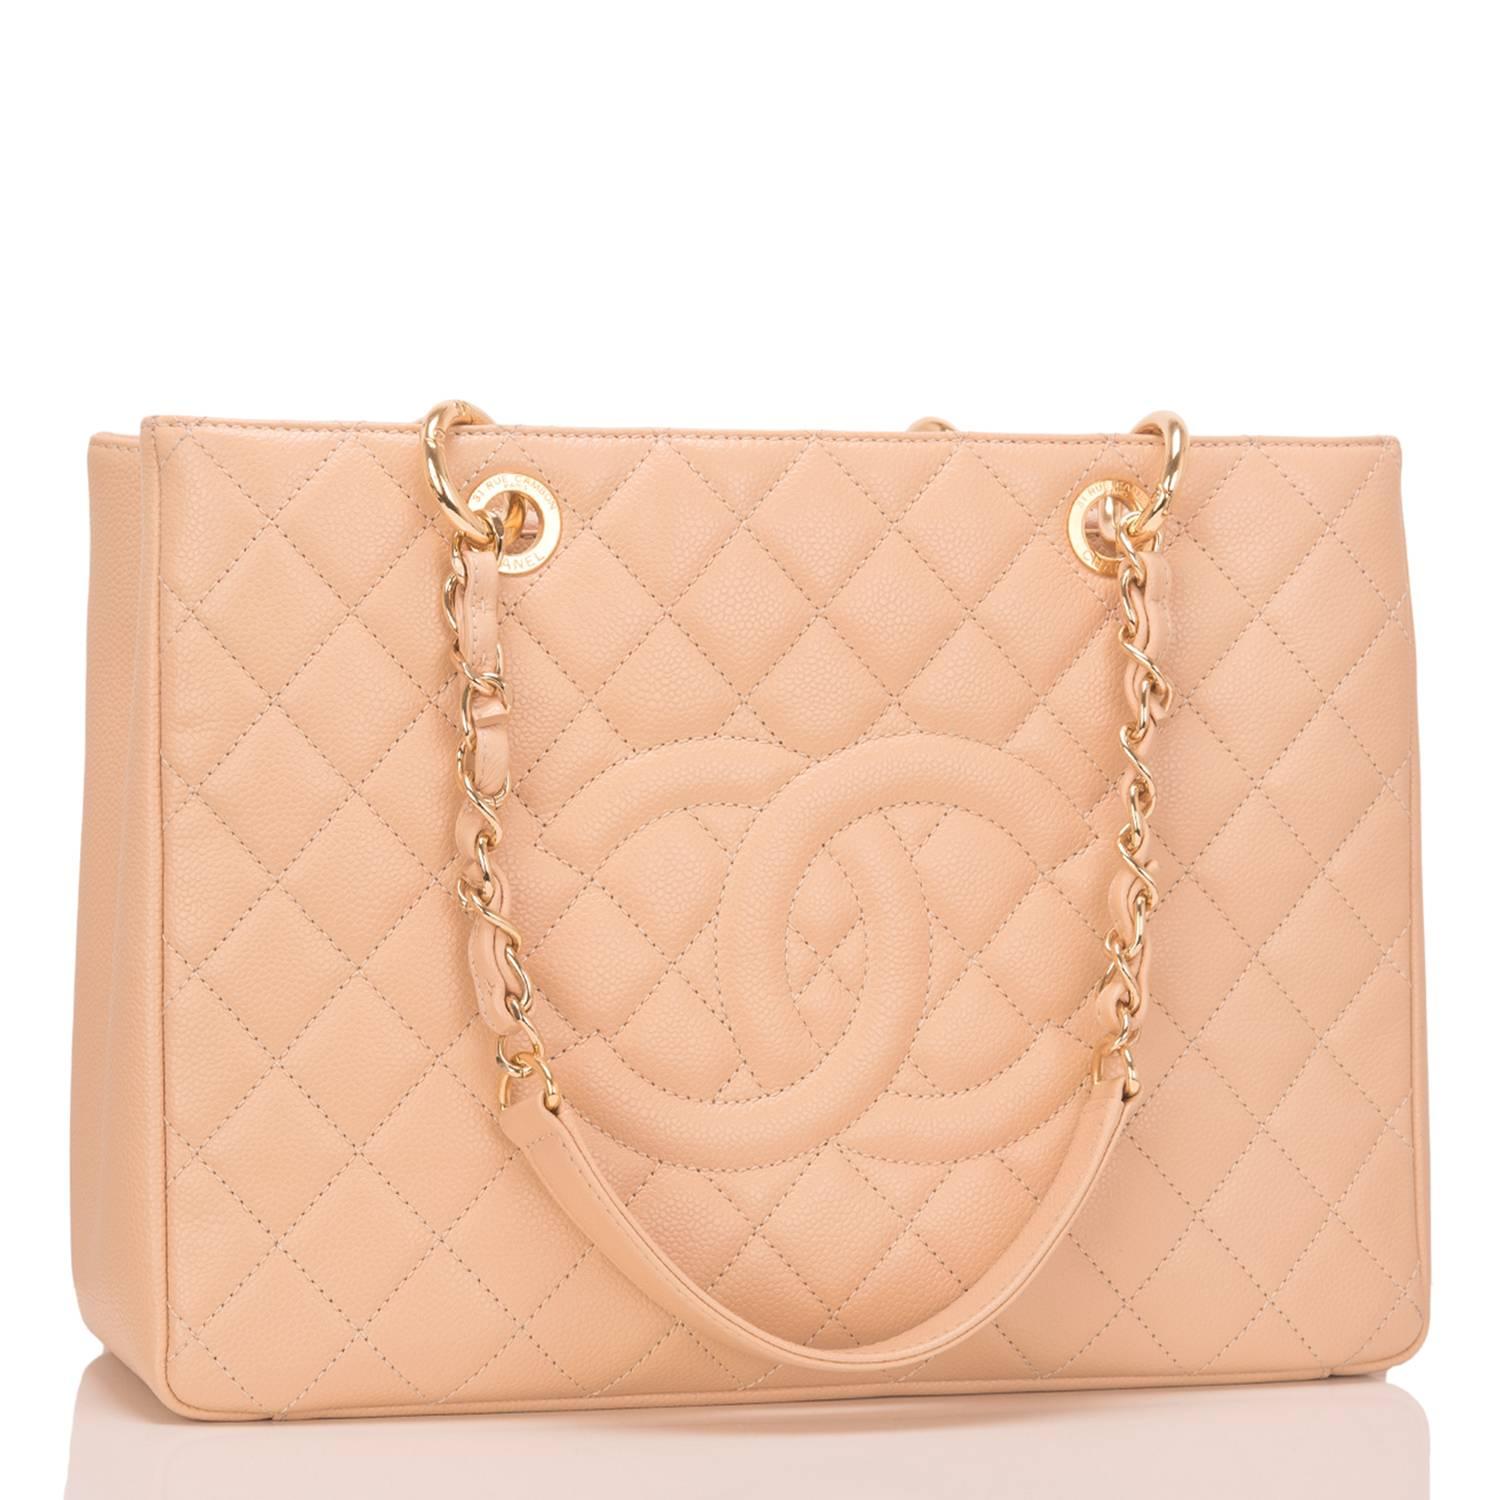 Chanel Grand Shopping Tote of light beige caviar leather with gold tone hardware.

This bag features front and rear quilting, a front stitched 